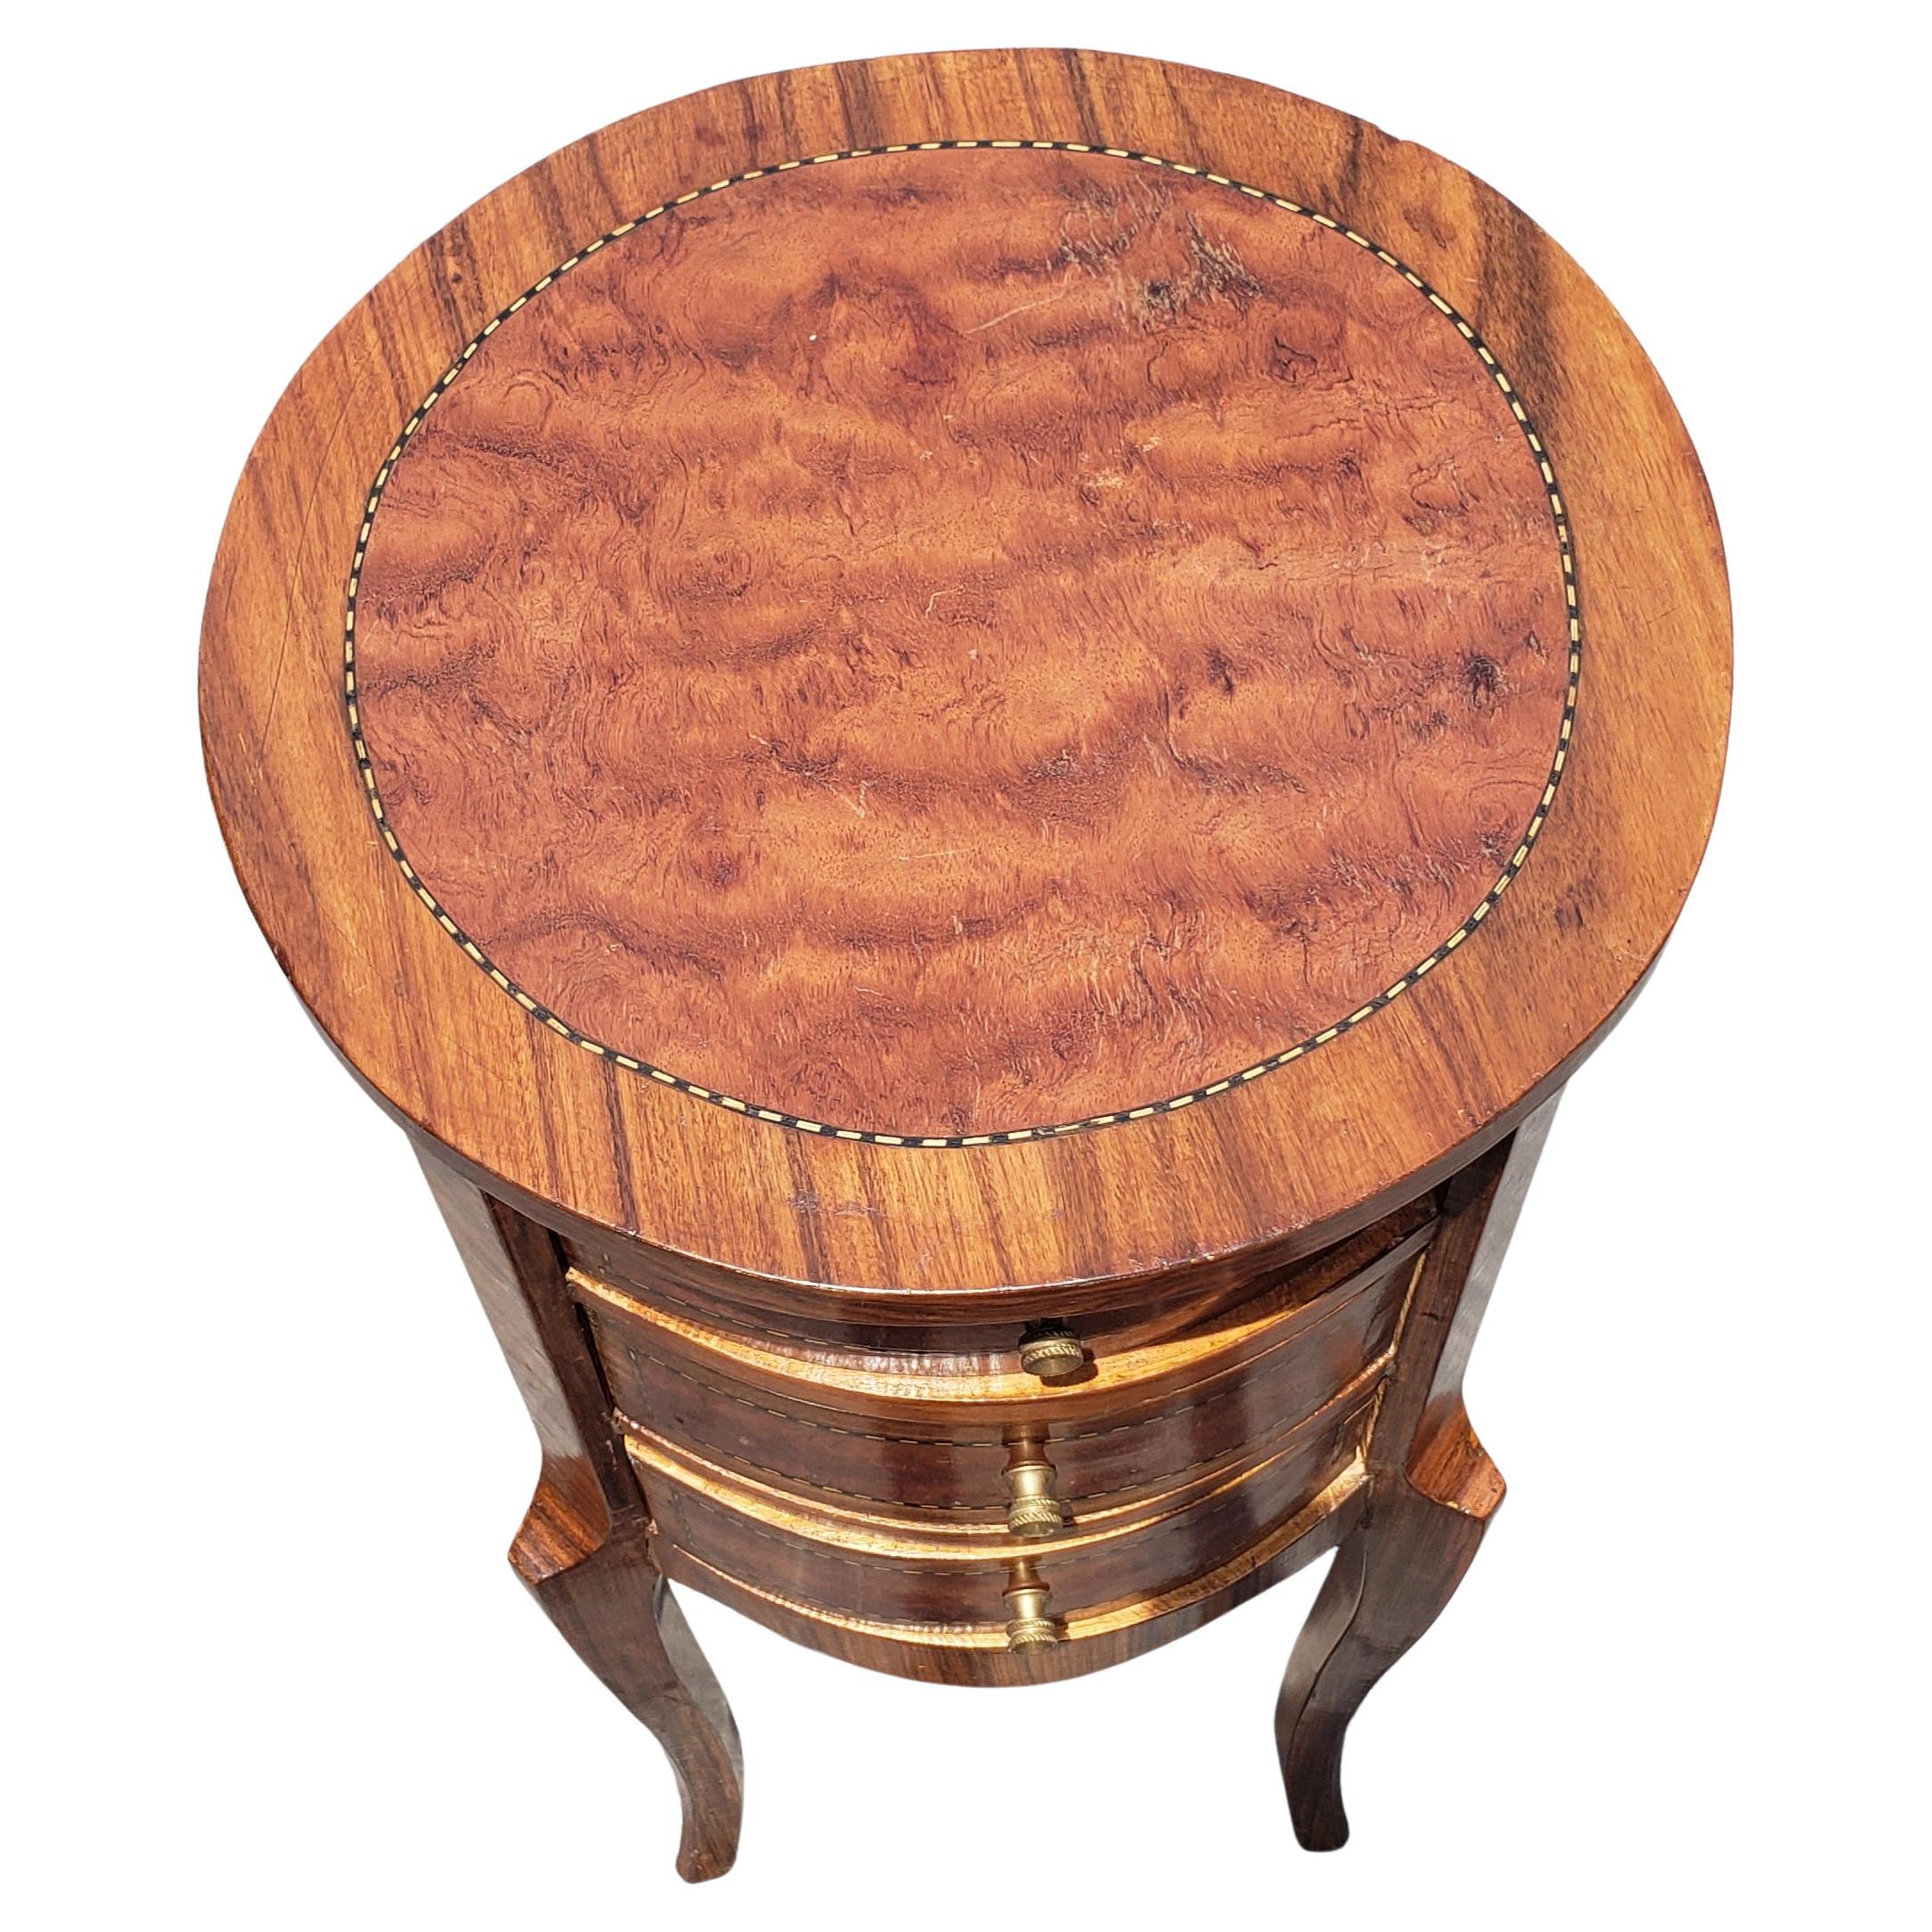 Louis XV style three drawer satinwood inlaid mixed banded fruitwood round side table in good vintage condition. Circa 1950s. Measures 13.5 inches in diameter and stands 30.75 inches tall. All three drawers opening and closing smoothly. Excellent as